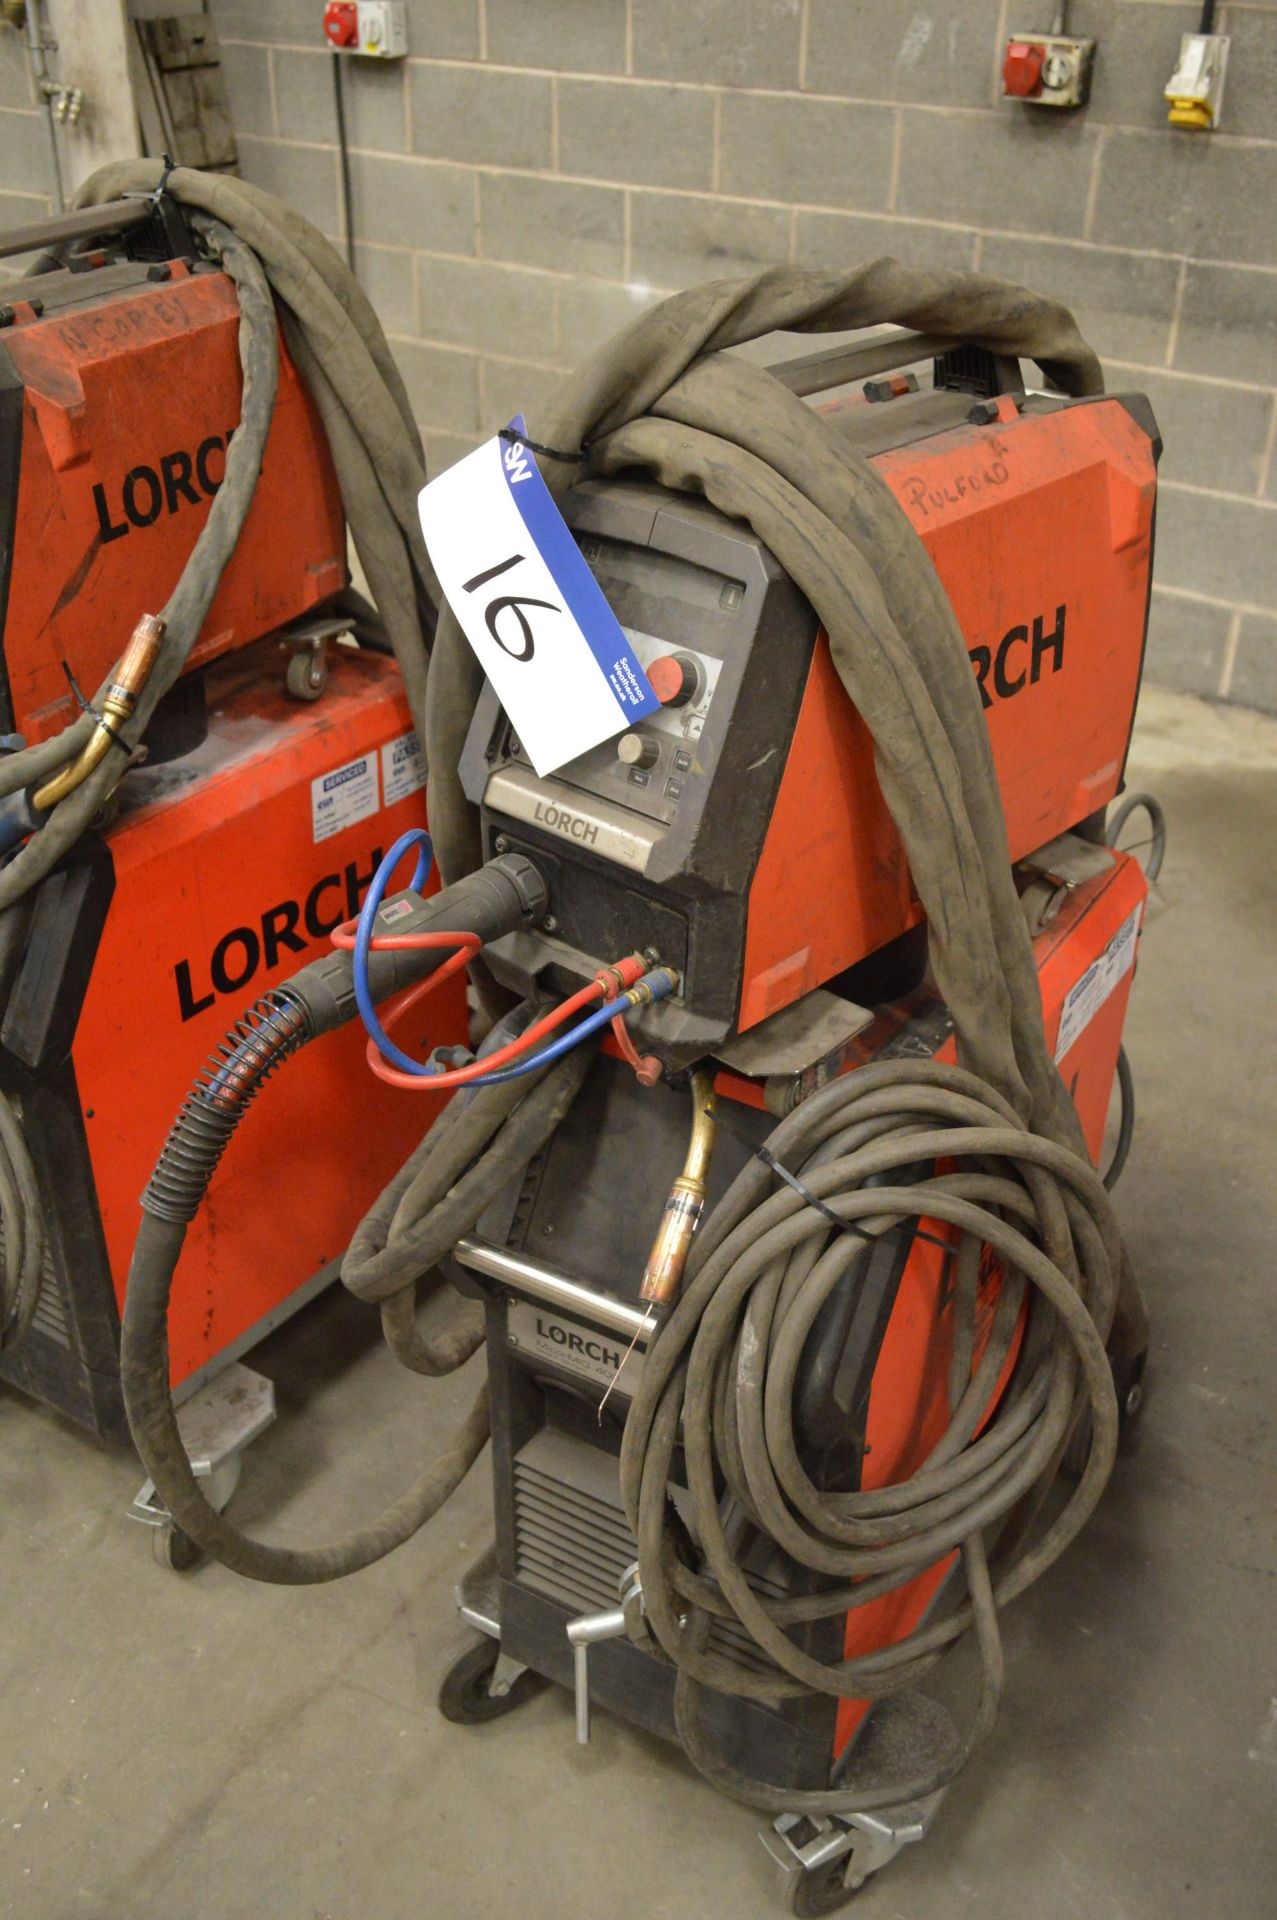 Lorch Micormig 400 Mig Welding Rectifier, serial no. 4062-2631-0005-3, with wire feed unit